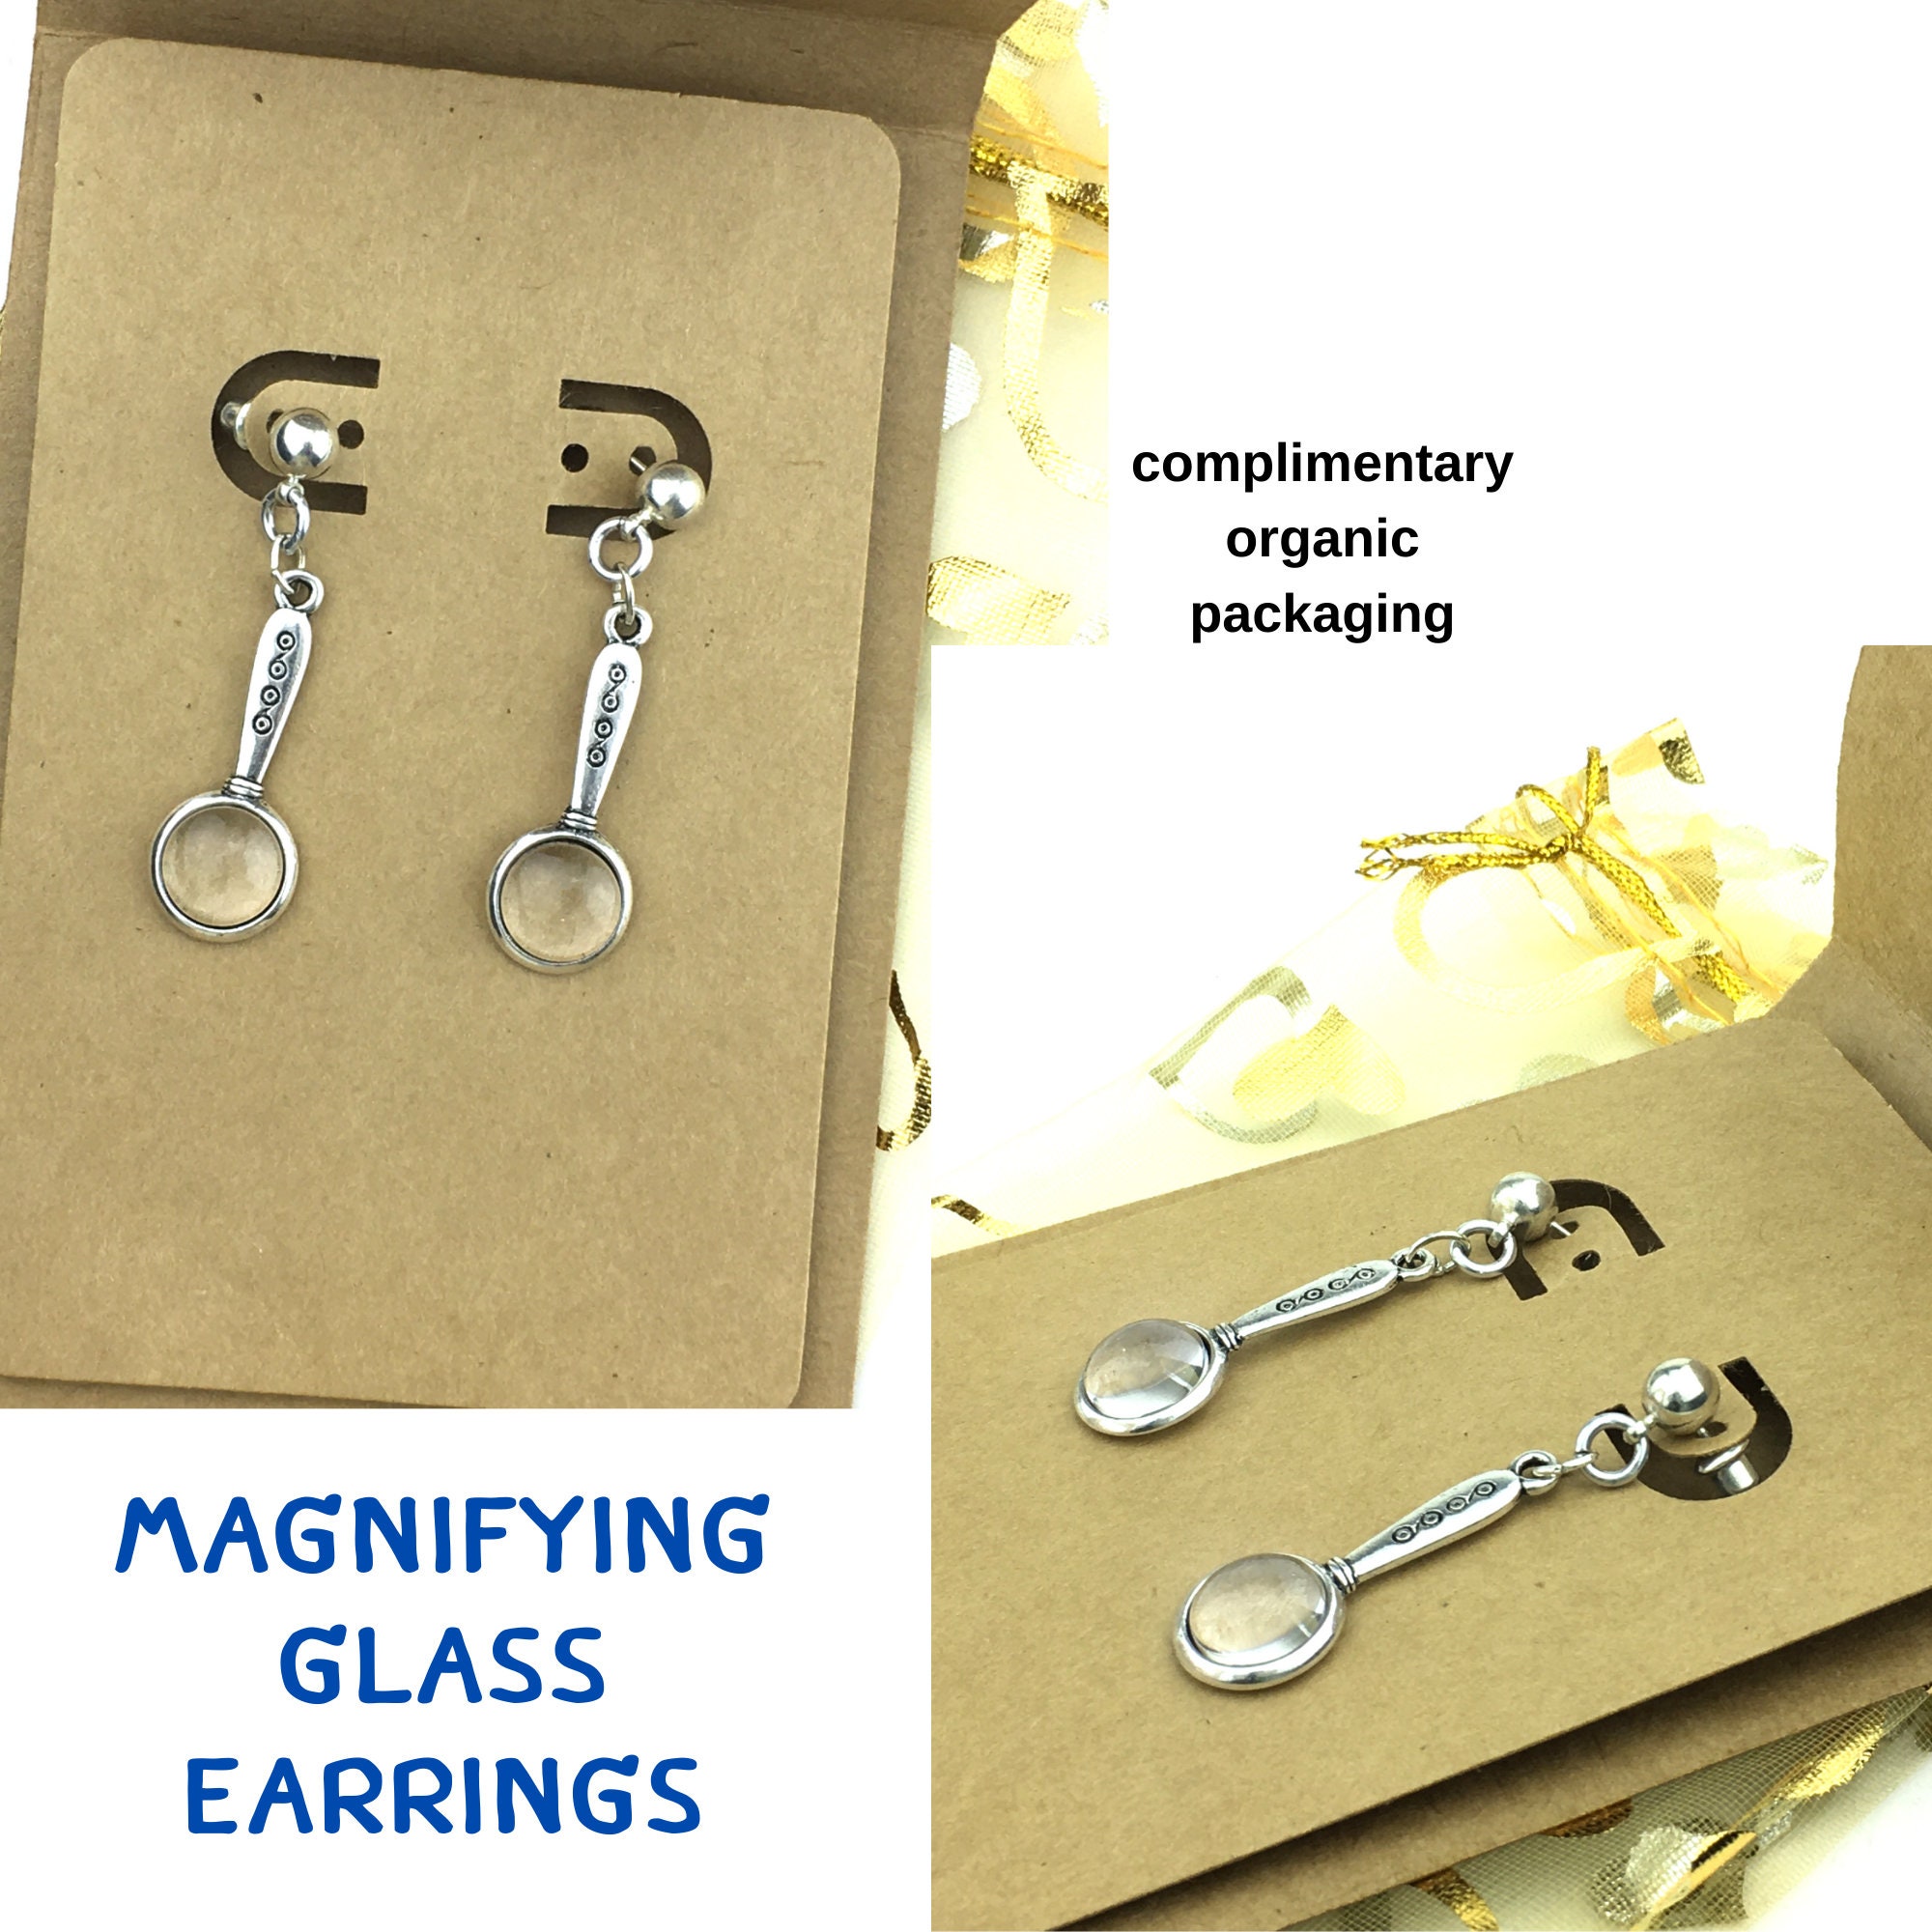 MAGNIFYING GLASS Earrings Spy Detective Research Tinkerer Jewelry UPICK  Hardware